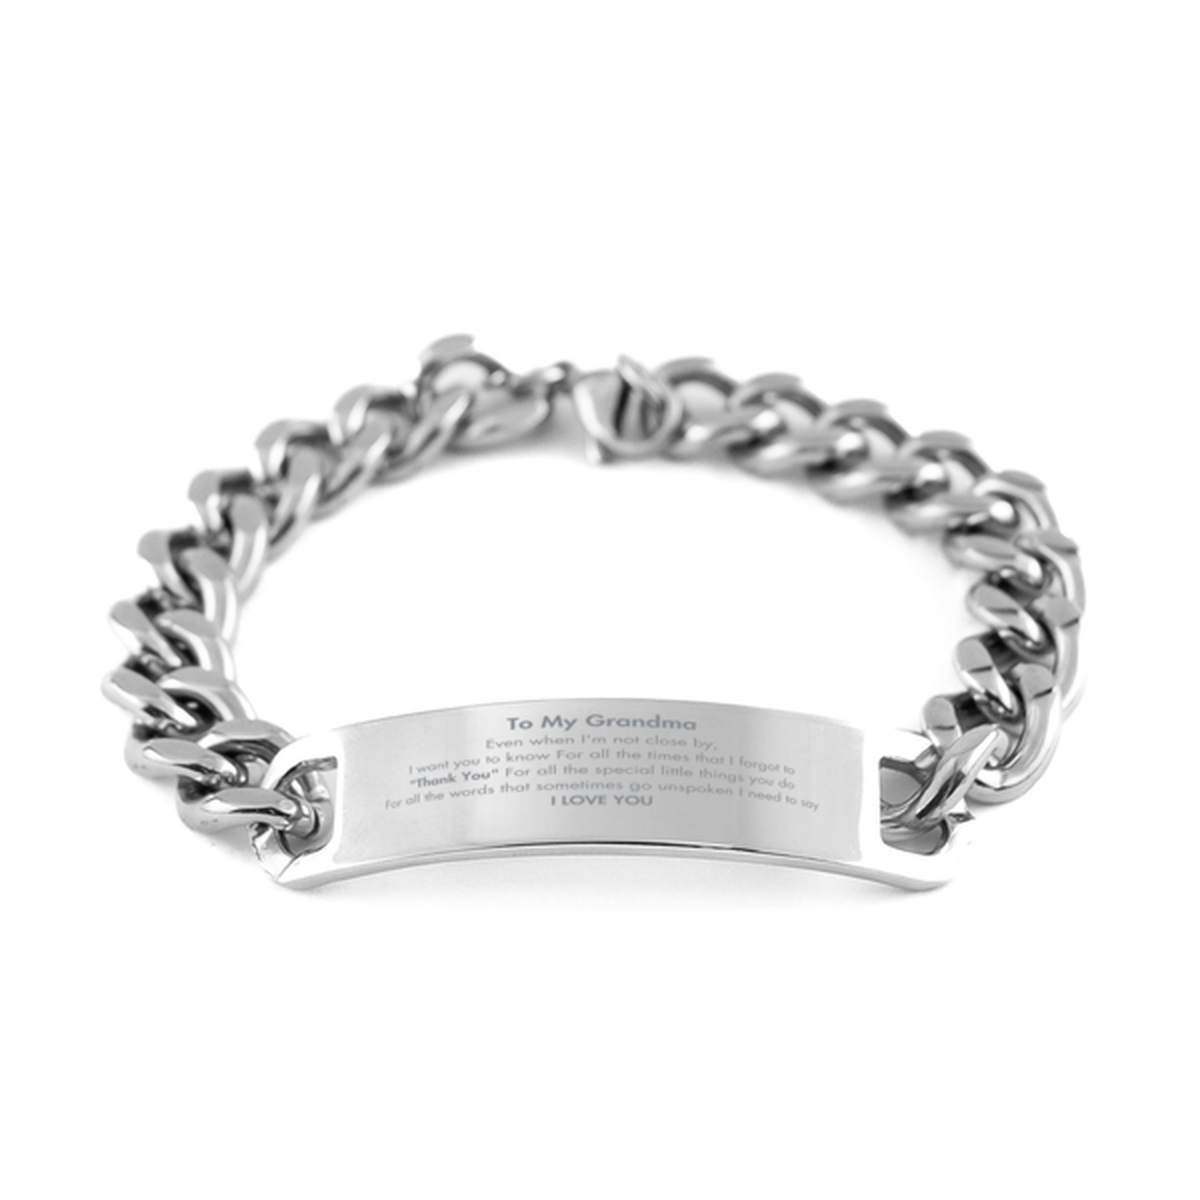 Thank You Gifts for Grandma, Keepsake Cuban Chain Stainless Steel Bracelet Gifts for Grandma Birthday Mother's day Father's Day Grandma For all the words That sometimes go unspoken I need to say I LOVE YOU